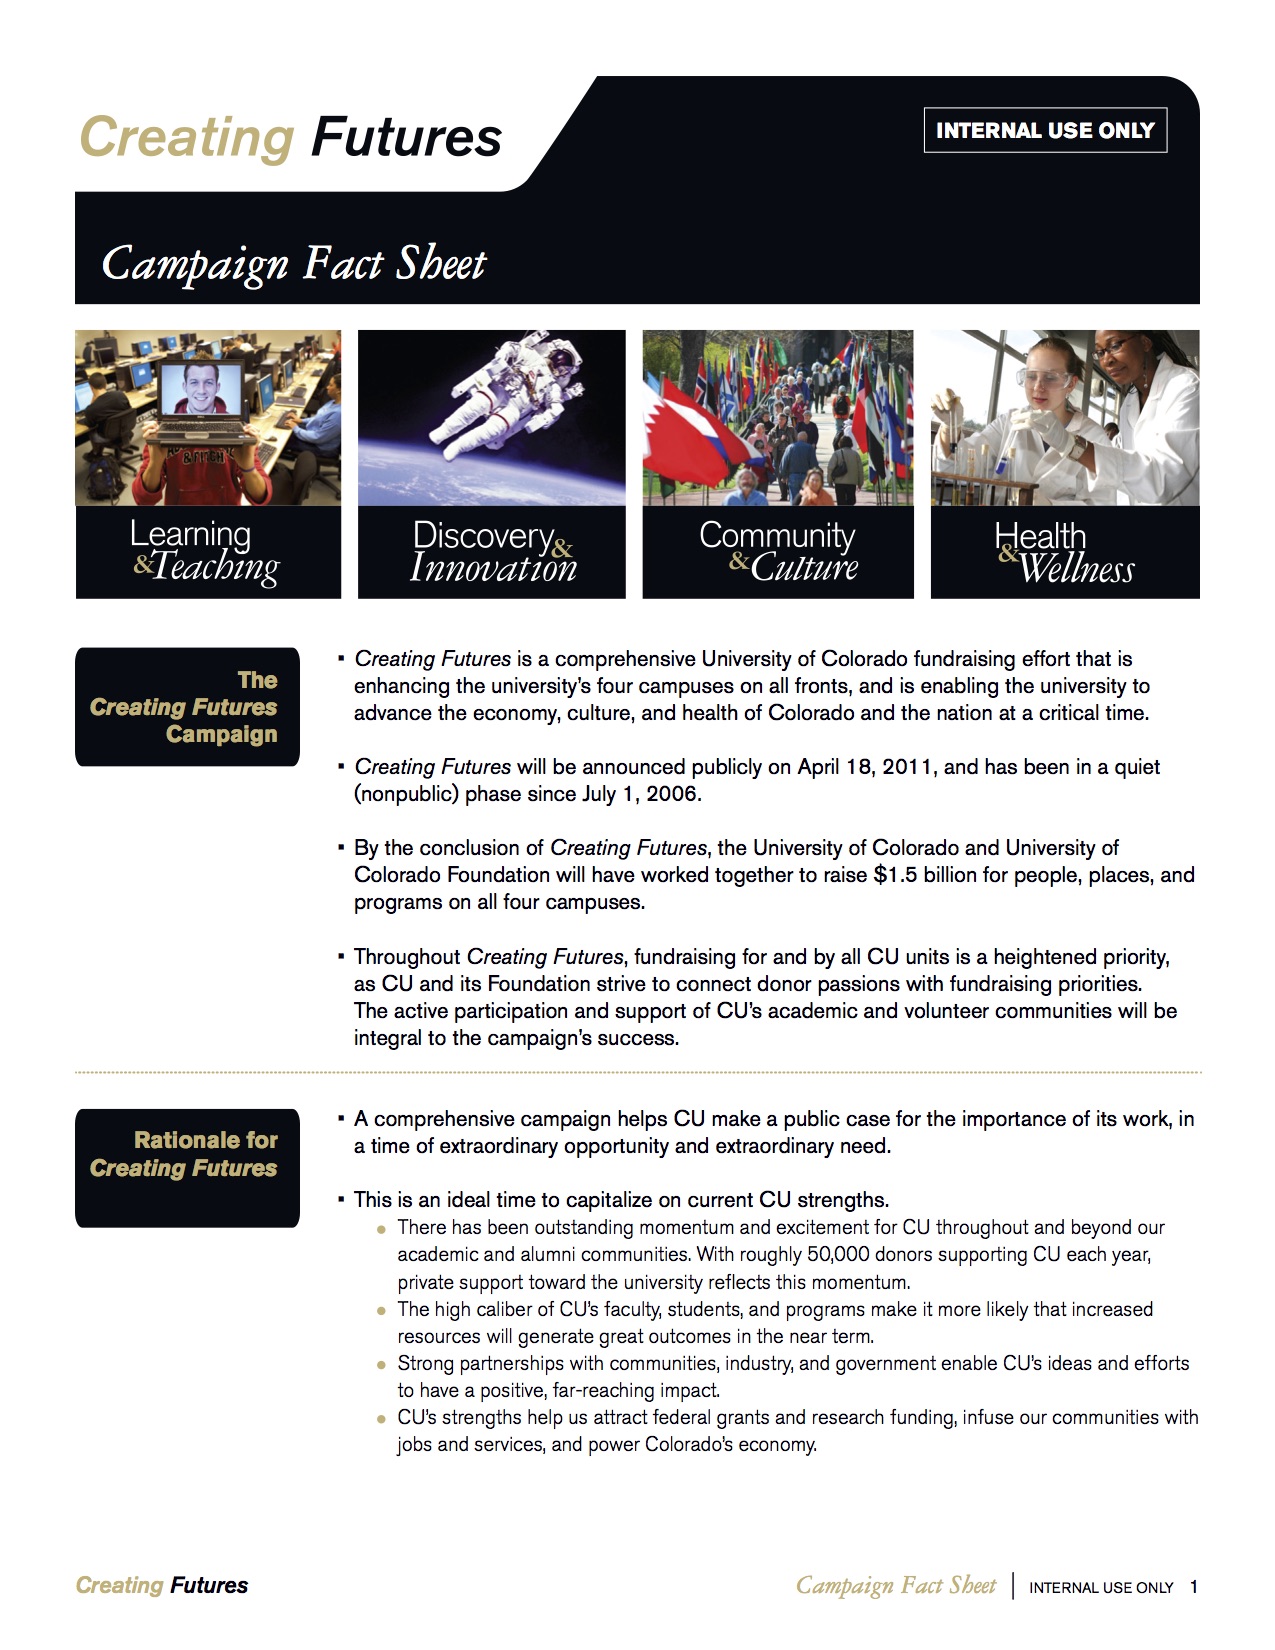 Campaign fact sheet